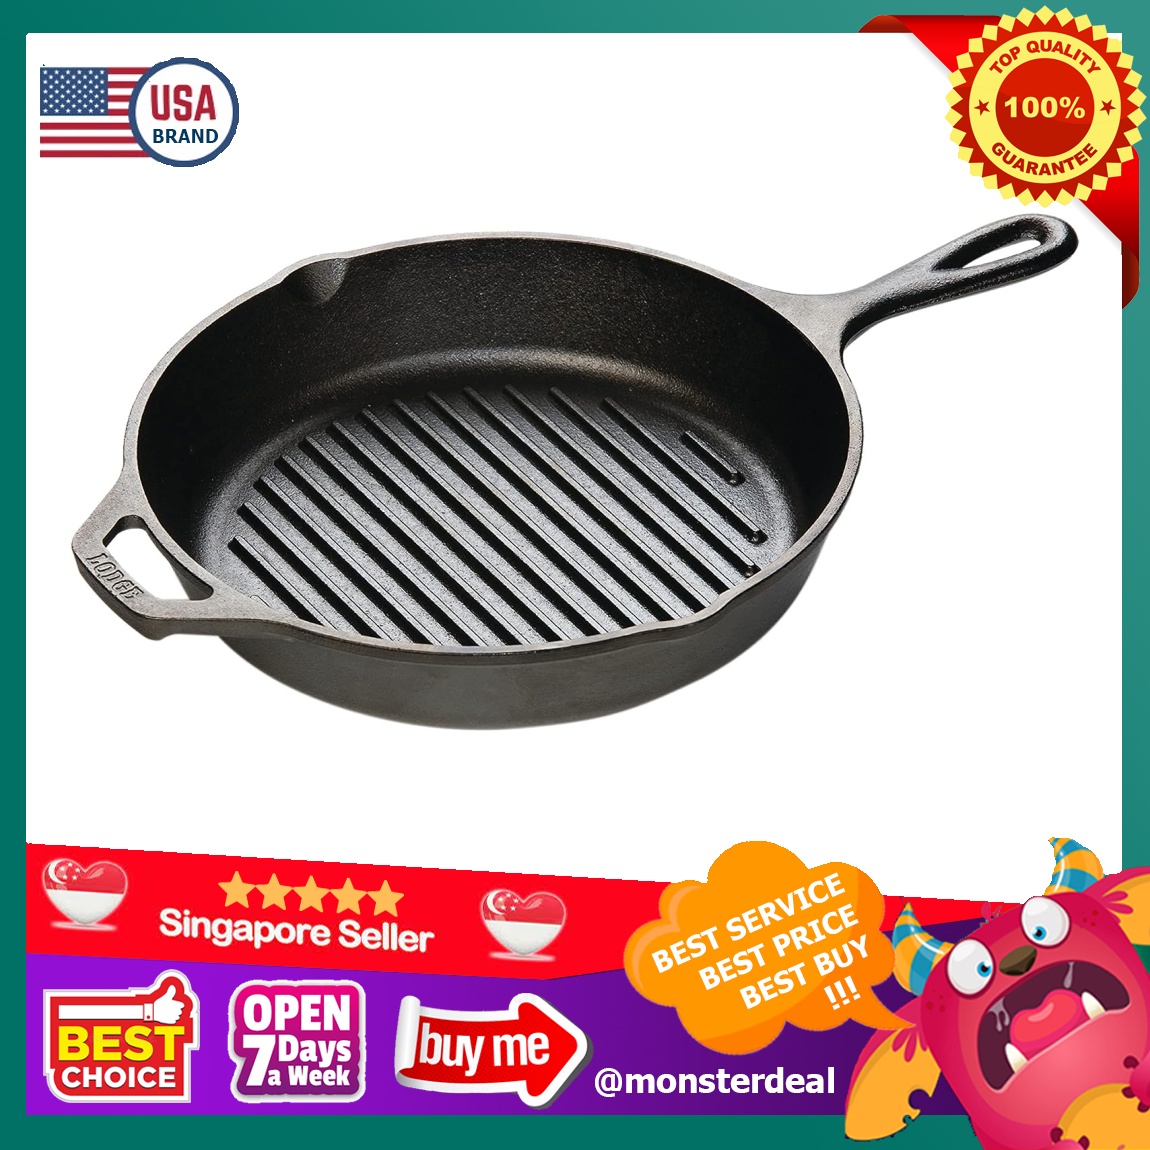 https://media.karousell.com/media/photos/products/2023/10/17/l8gp3_cast_iron_grill_pan_1025_1697527484_23a37160